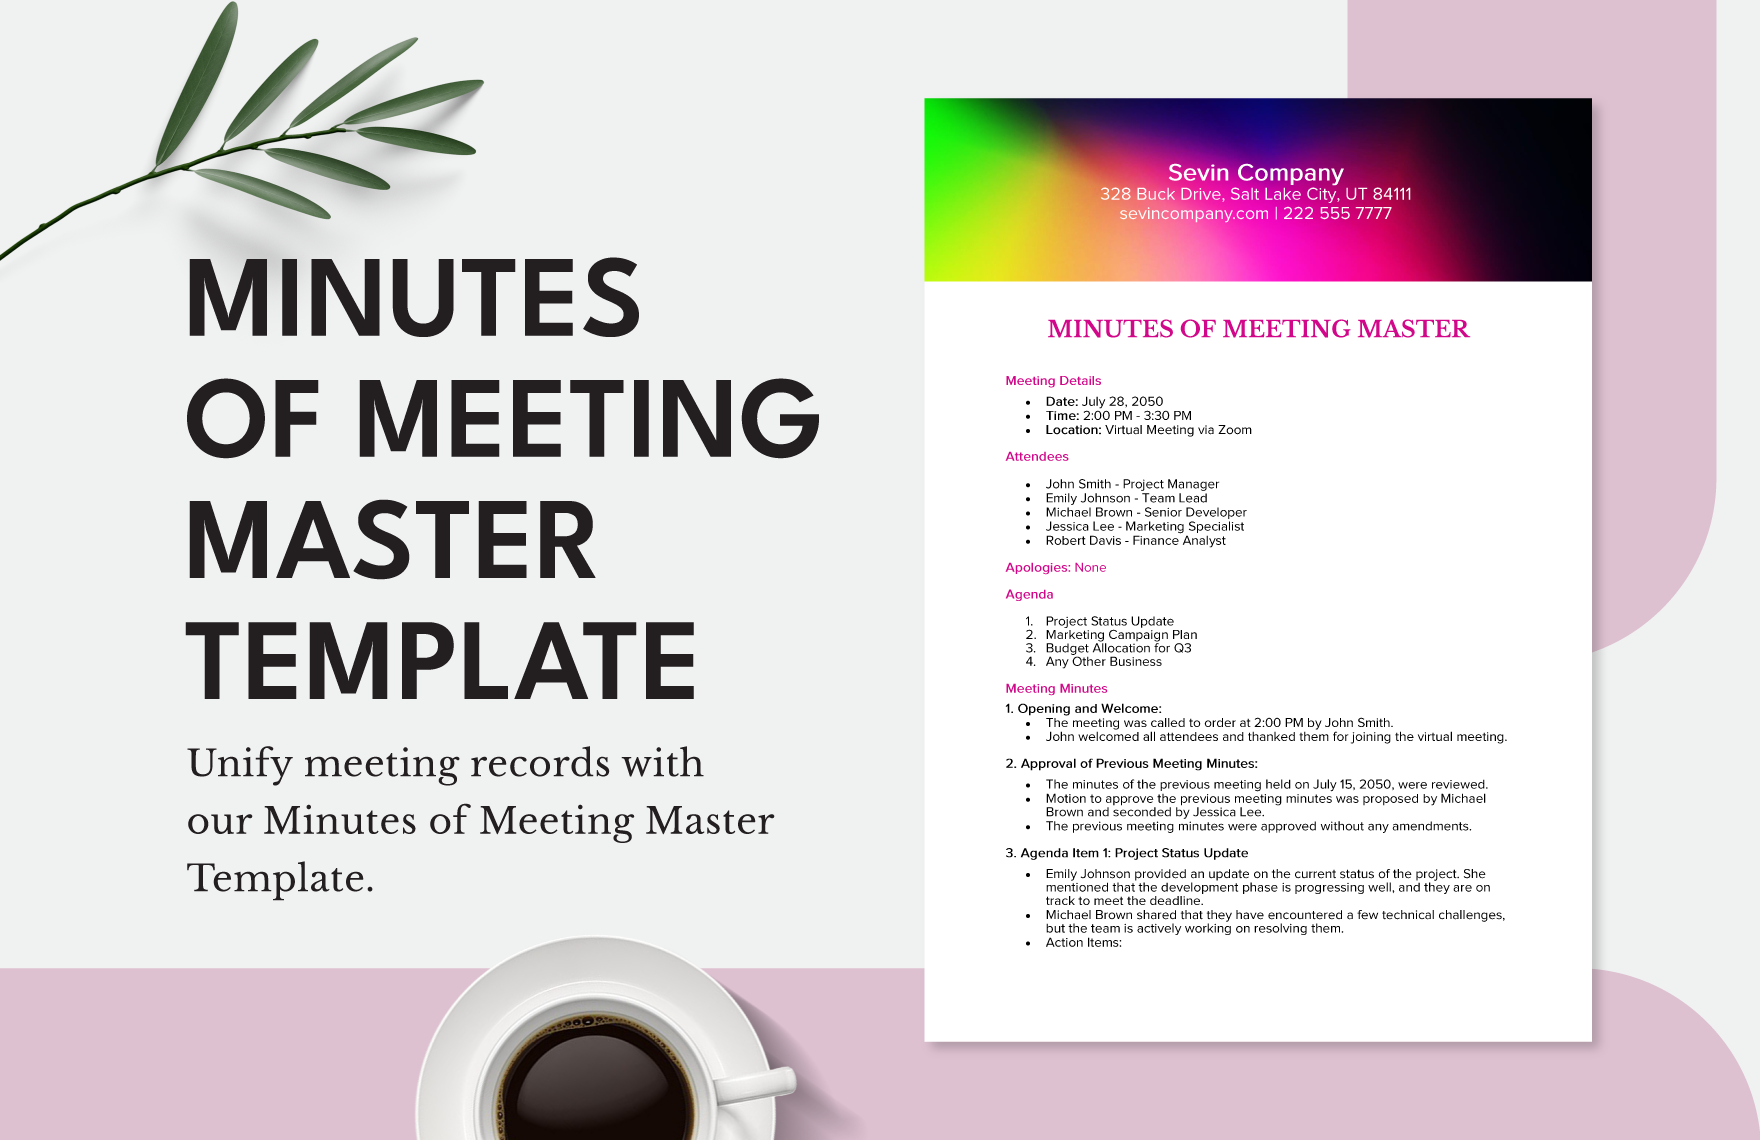 Minutes of Meeting Master Template in Word, Google Docs, PDF, Apple Pages